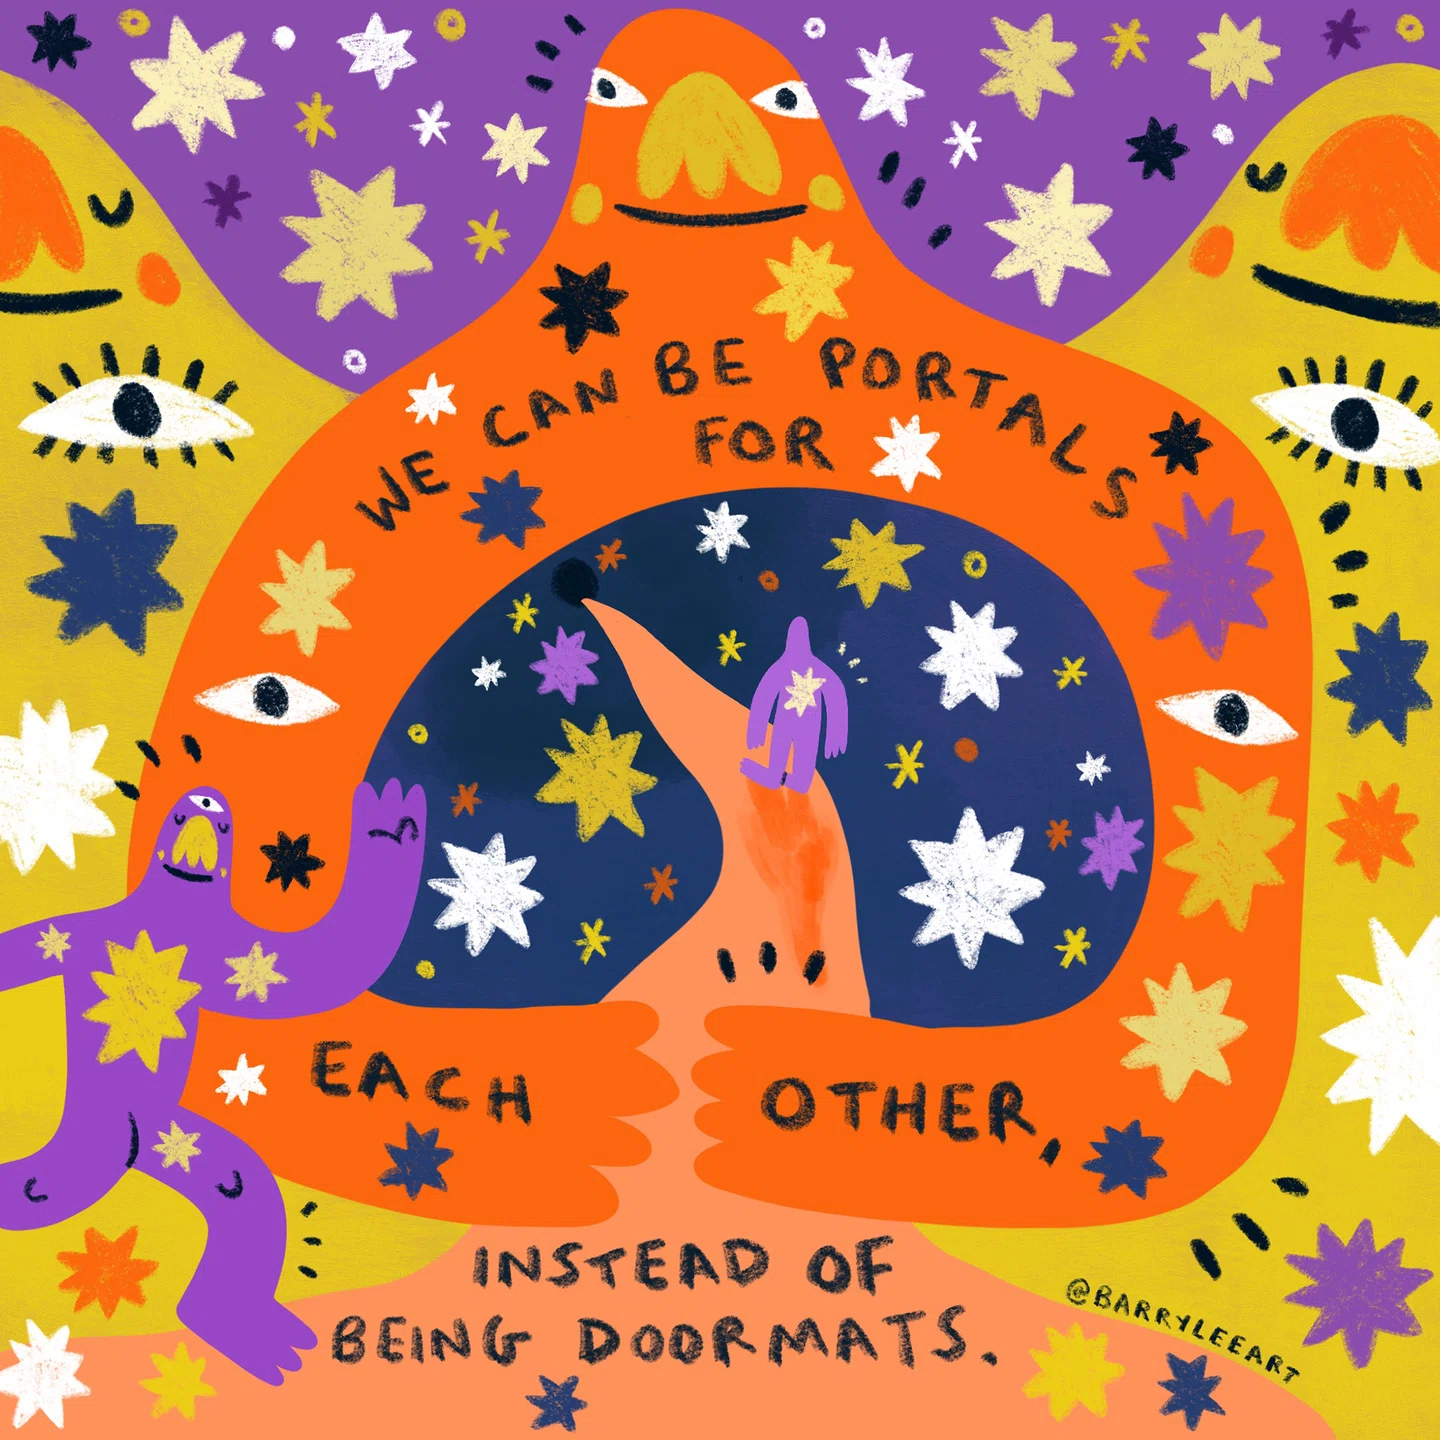 Inspired by the Muppets and Keith Haring, illustrator Barry Lee uses joyful  imagery to spread powerful messages